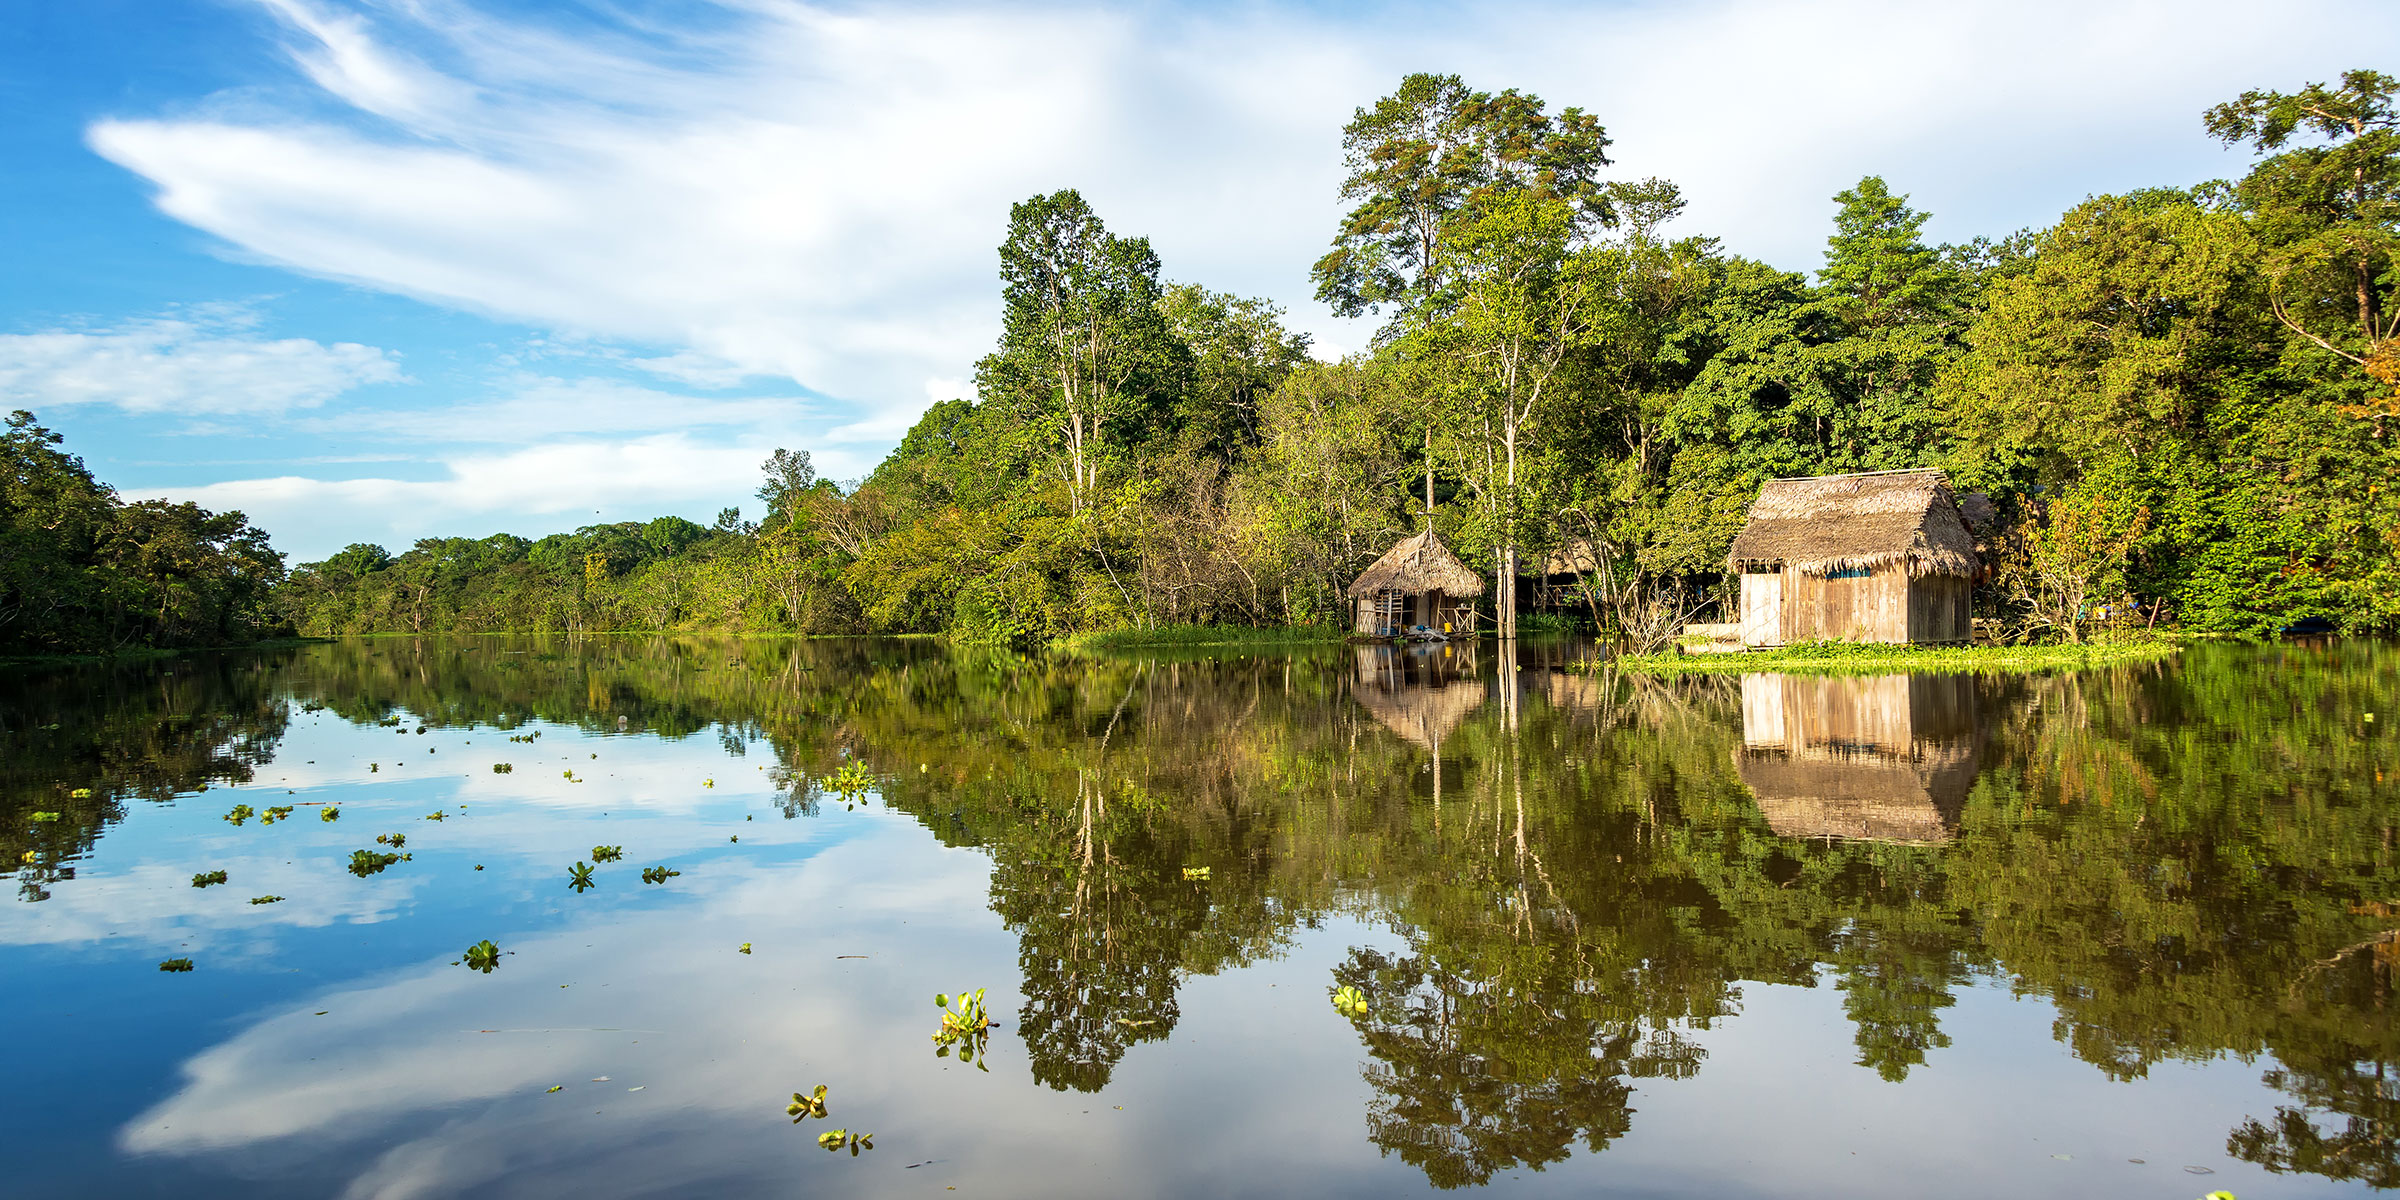 Small wooden homes on the banks of the Yanayacu River near Iquitos, Peru